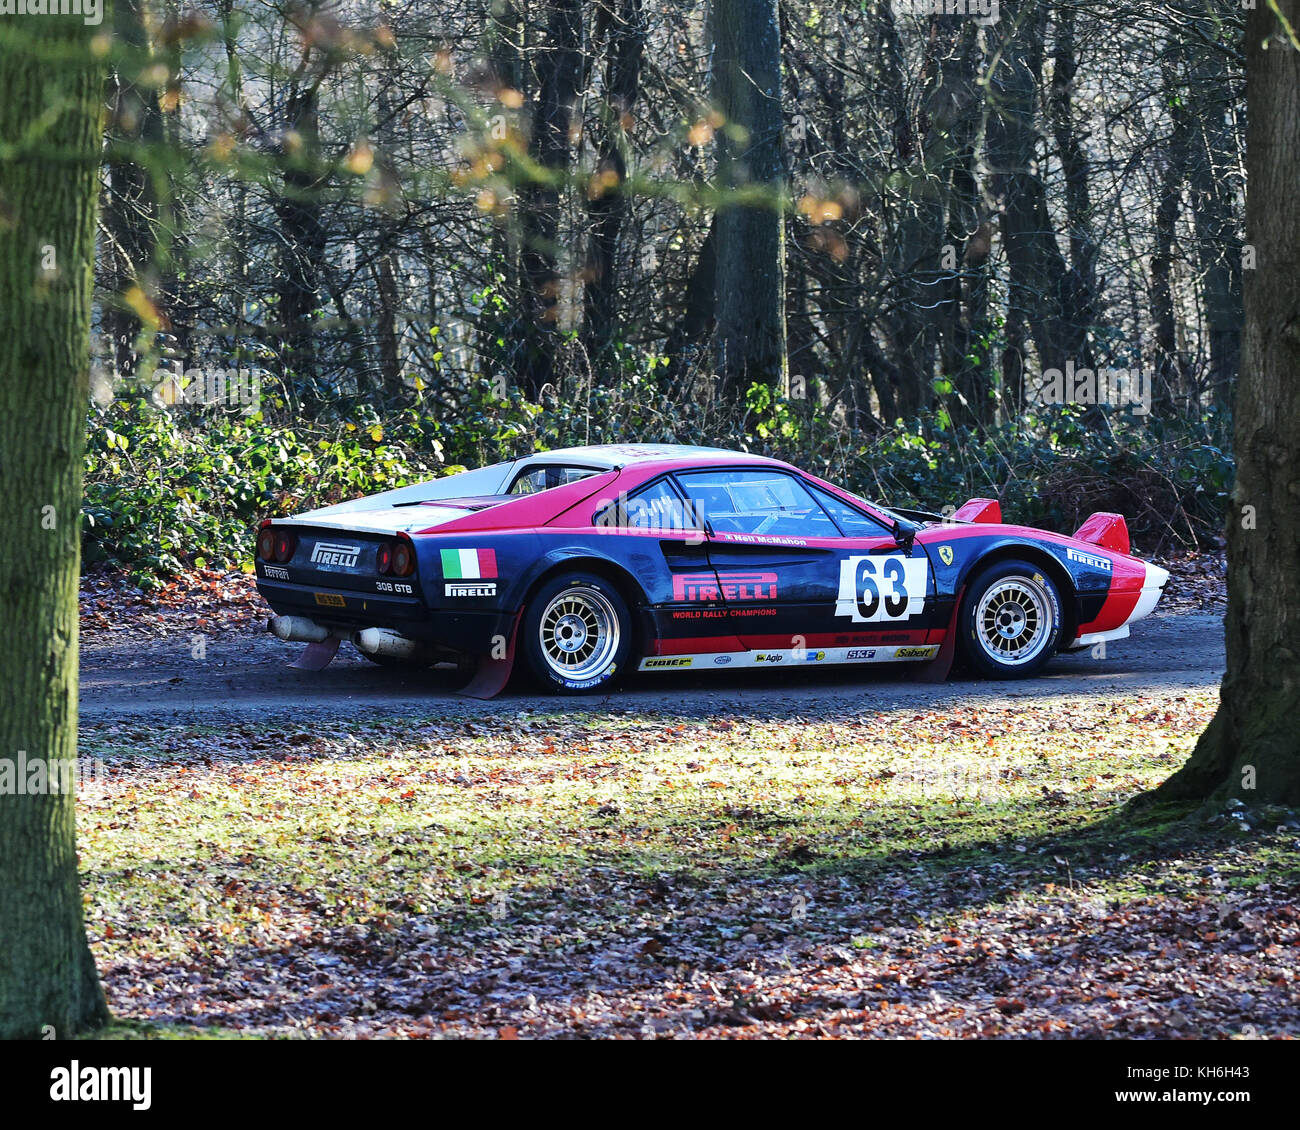 Neil McMahon, Dave Mellet, Ferrari 308 Michelotto Gr 4, MGJ Rally Stages, Chelmsford Motor Club, Brands Hatch,  Saturday, 21st January 2017, MSV, Rall Stock Photo